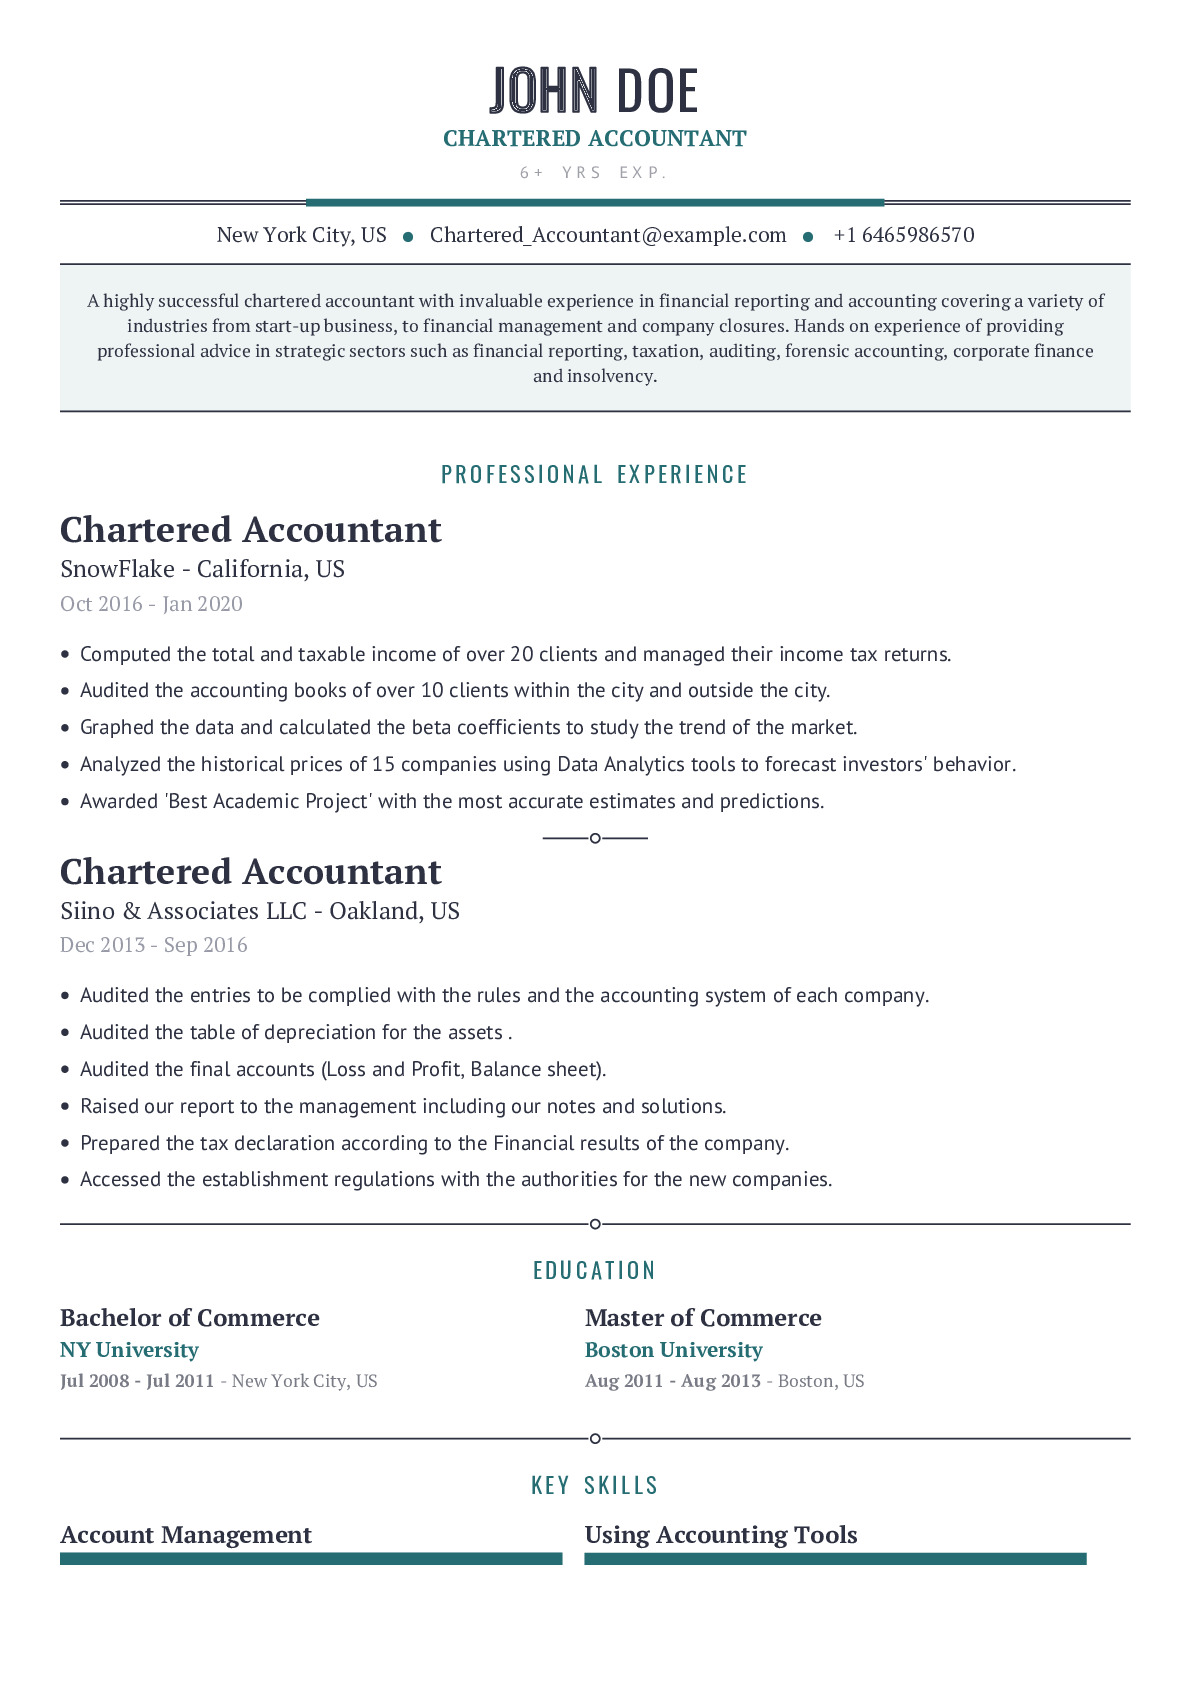 Chartered Accountant Resume Example With Content Sample  CraftmyCV